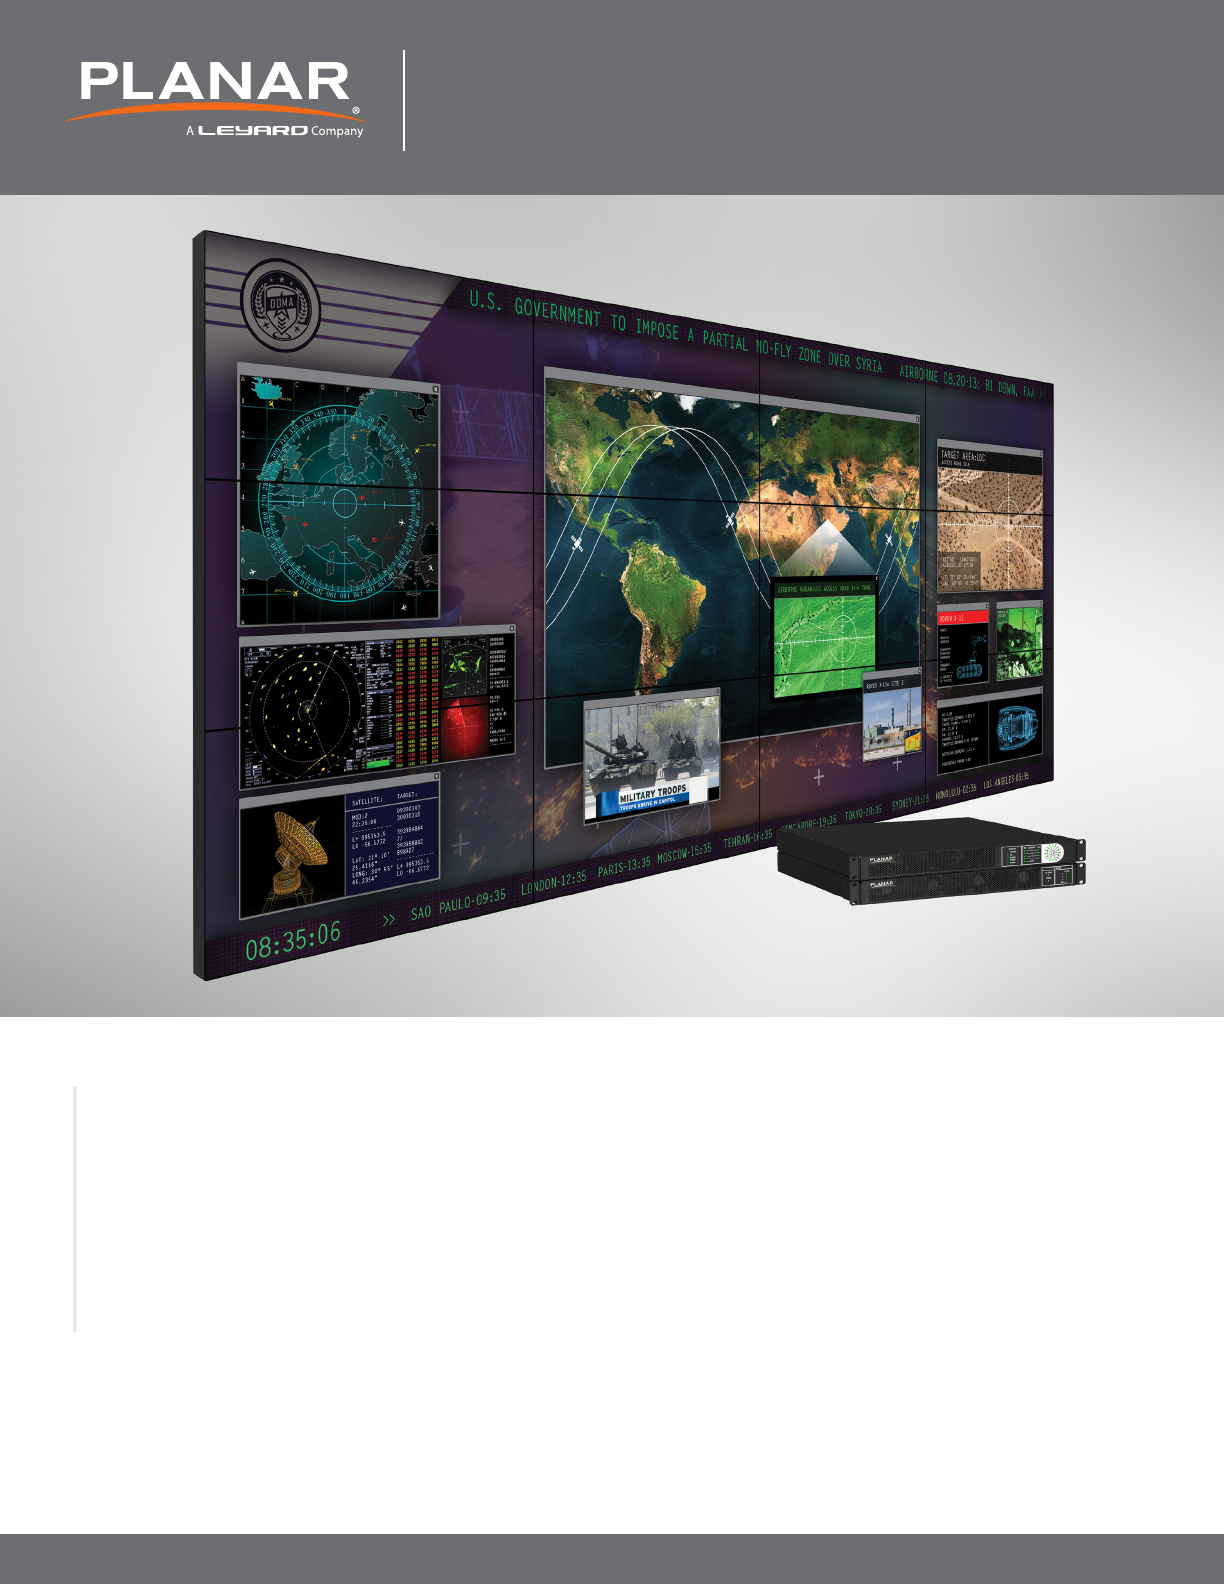 NEW PLANAR Clarity Matrix with G2 for Video Wall 750-2156-00 